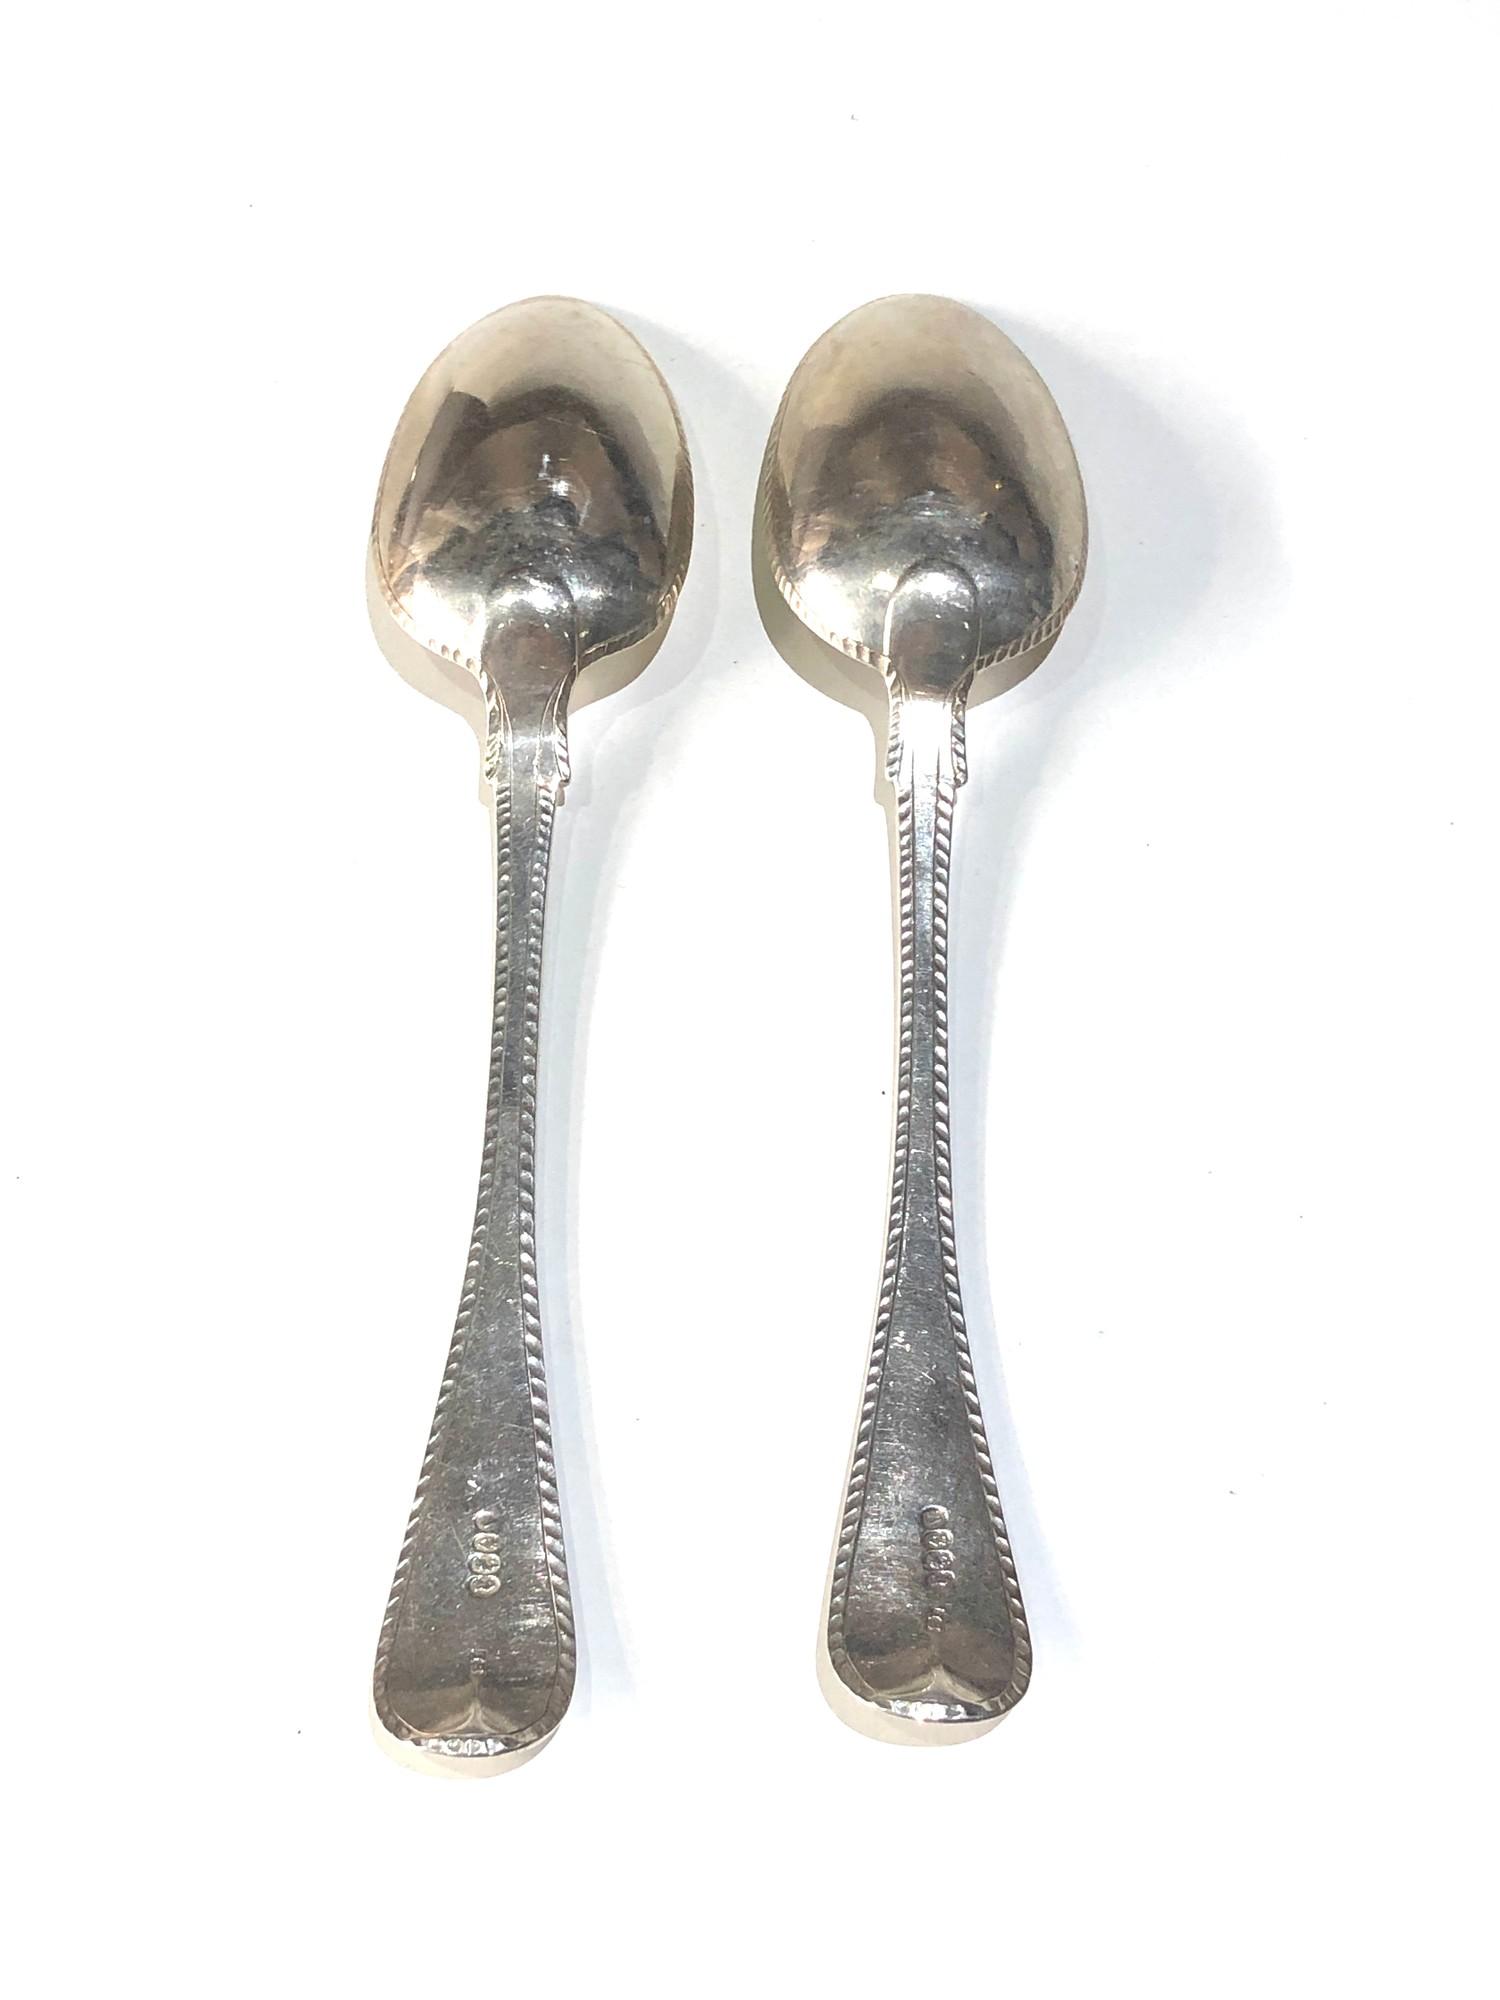 Pair of Irish Georgian silver table spoons each measures approx 22.2cm total weight 126g - Image 3 of 4